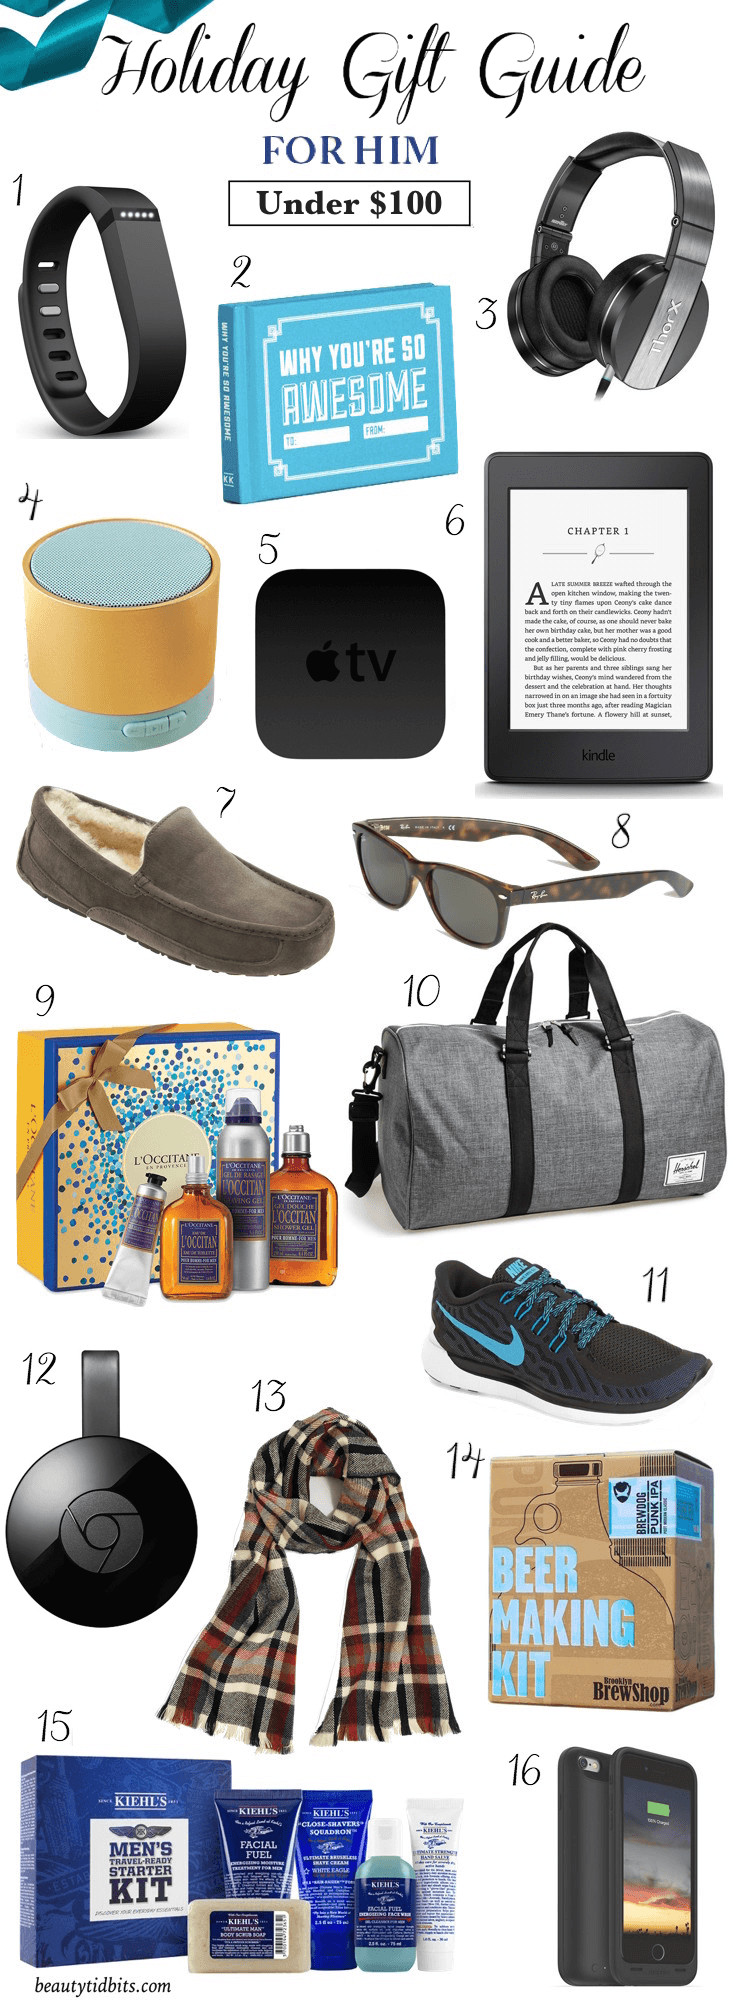 Christmas Gift Ideas For Guys
 Holiday Gifts Your Man Will Love and Actually Use